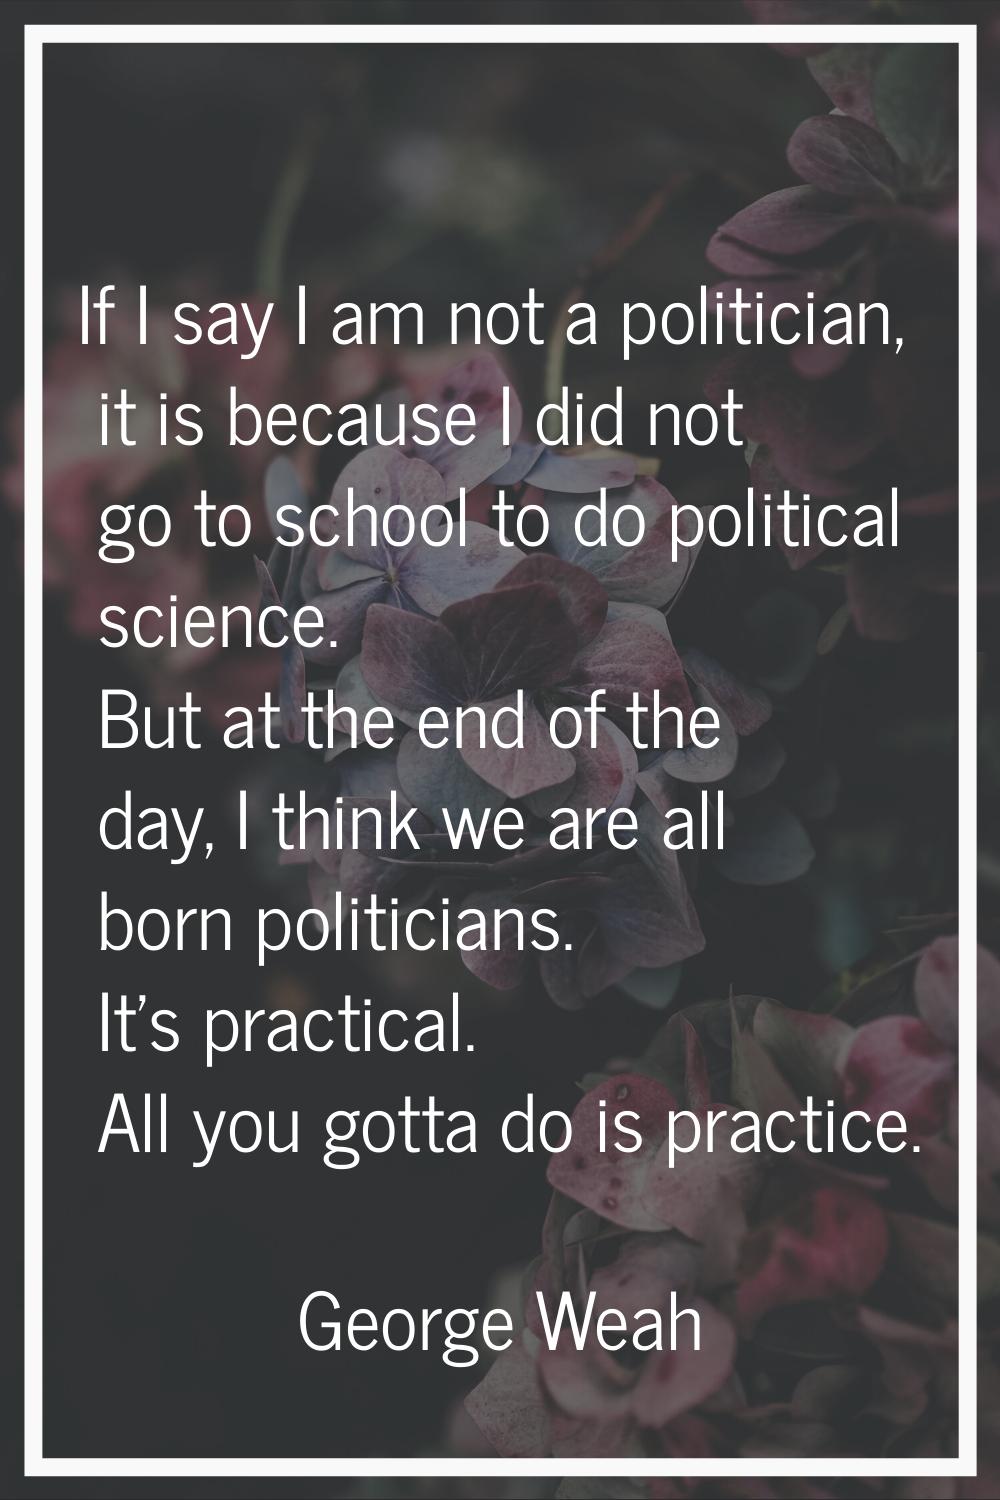 If I say I am not a politician, it is because I did not go to school to do political science. But a